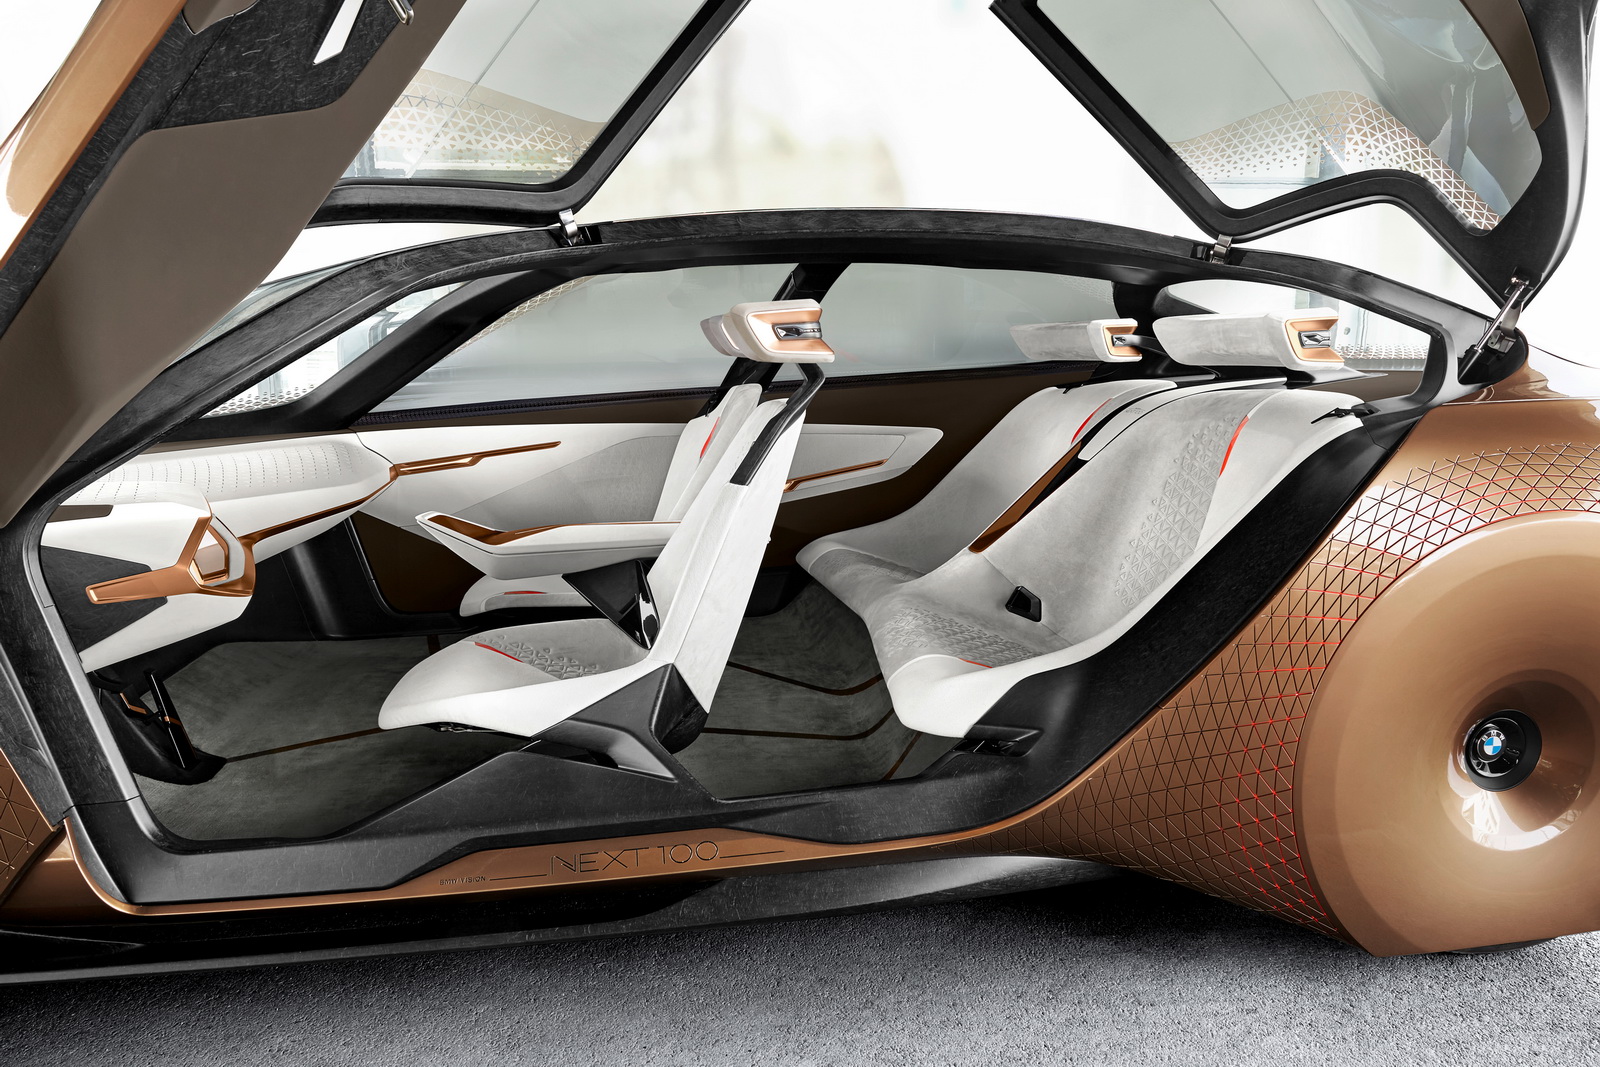 RollsRoyce Vision Next 100 concept  the future of the luxury car  evo